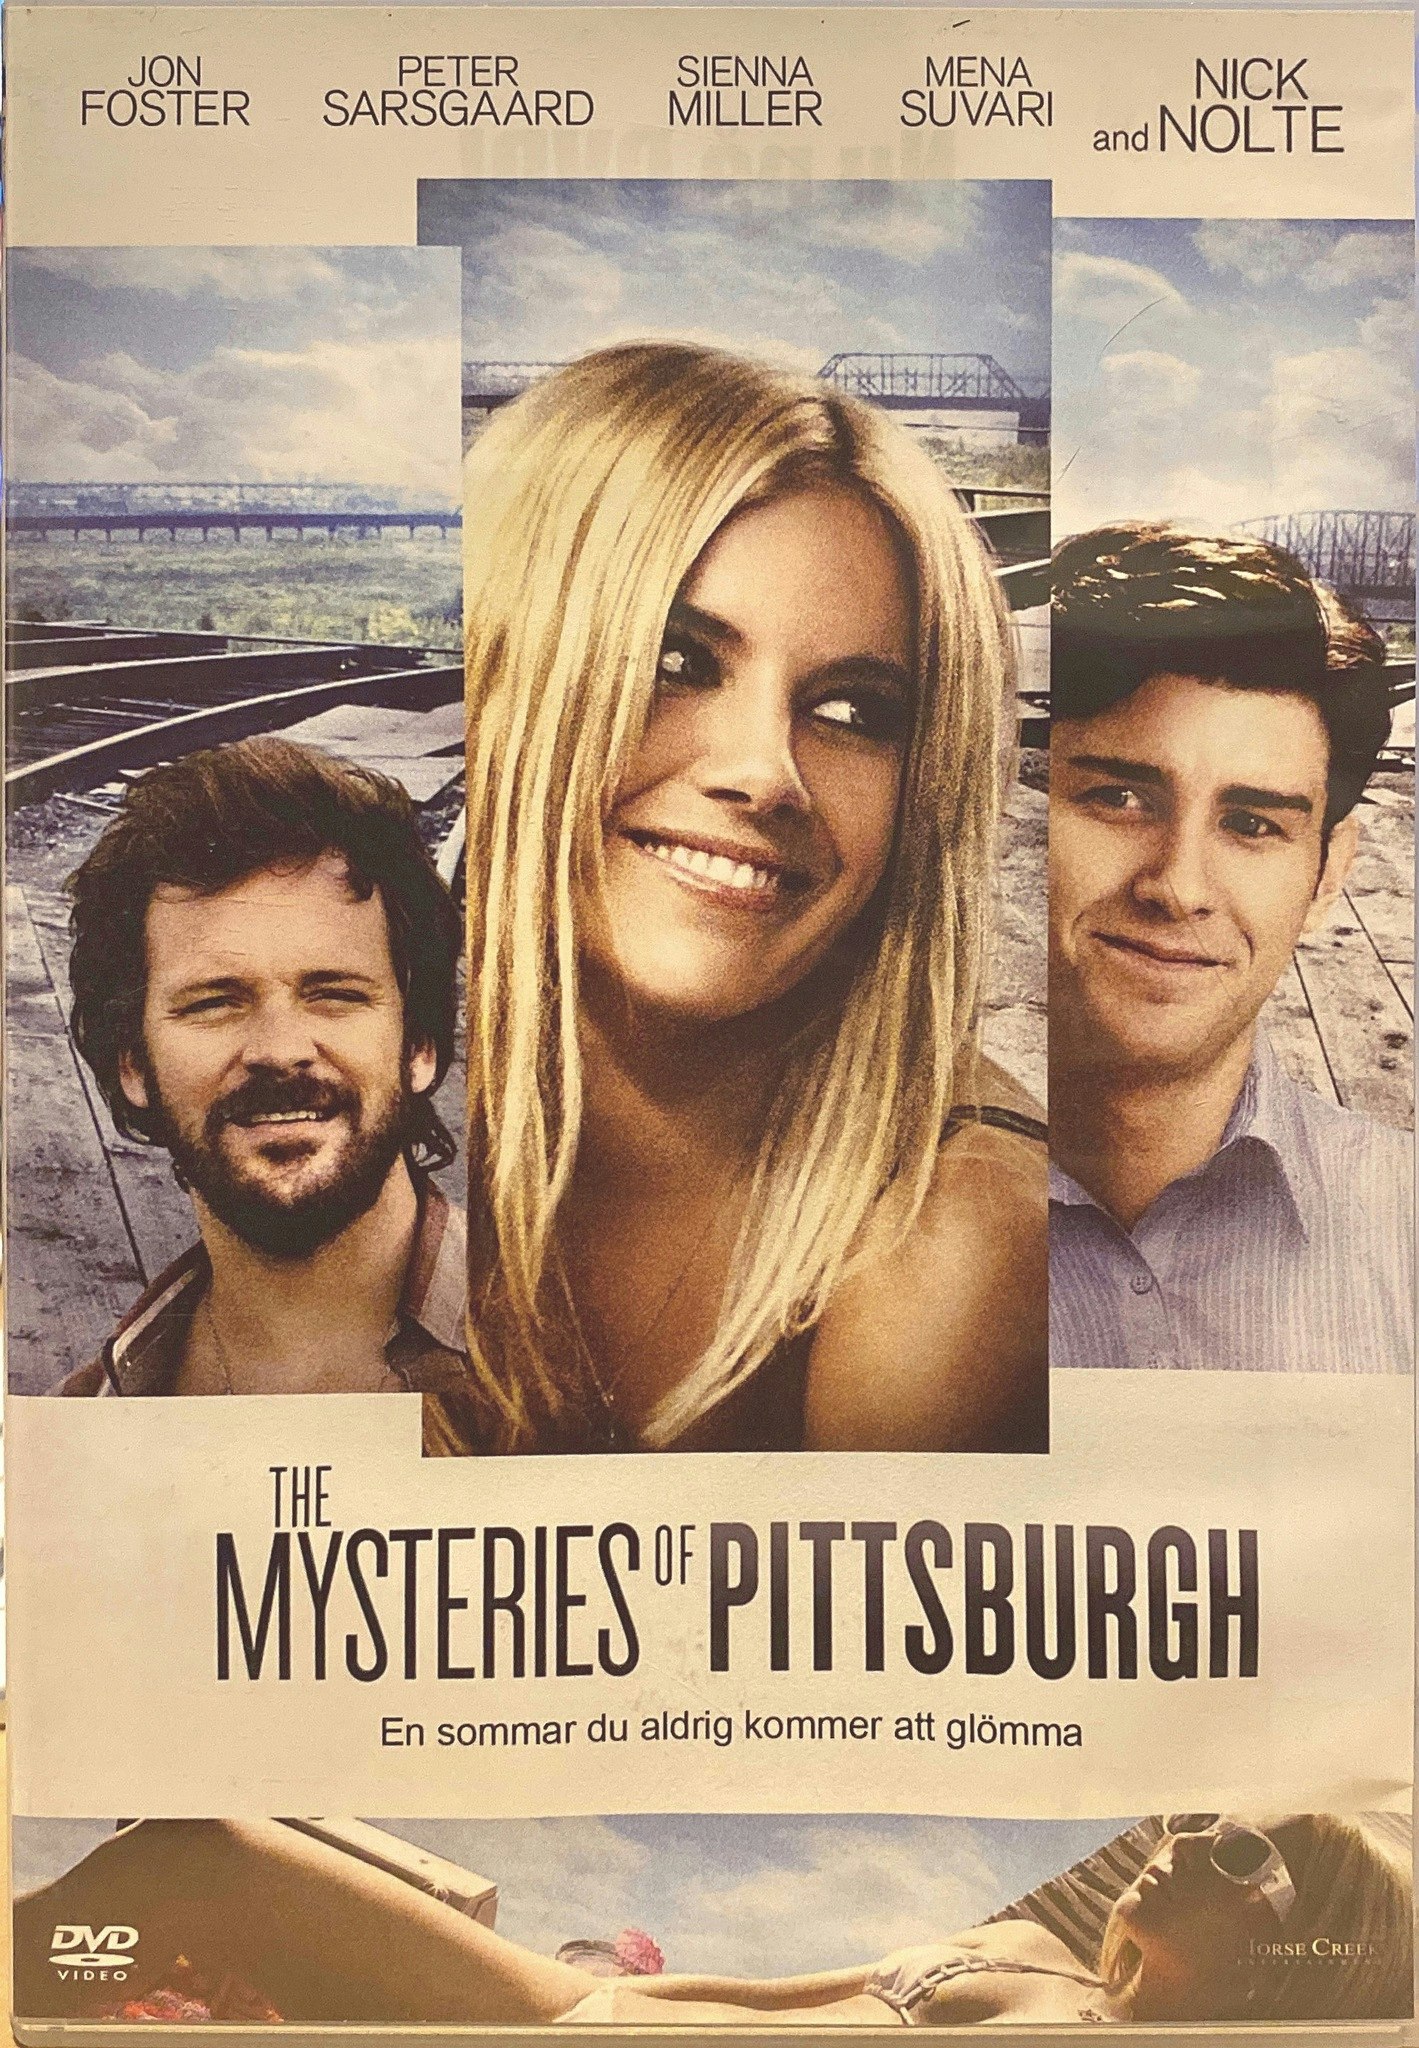 The Mysteries of Pittsburgh (DVD)